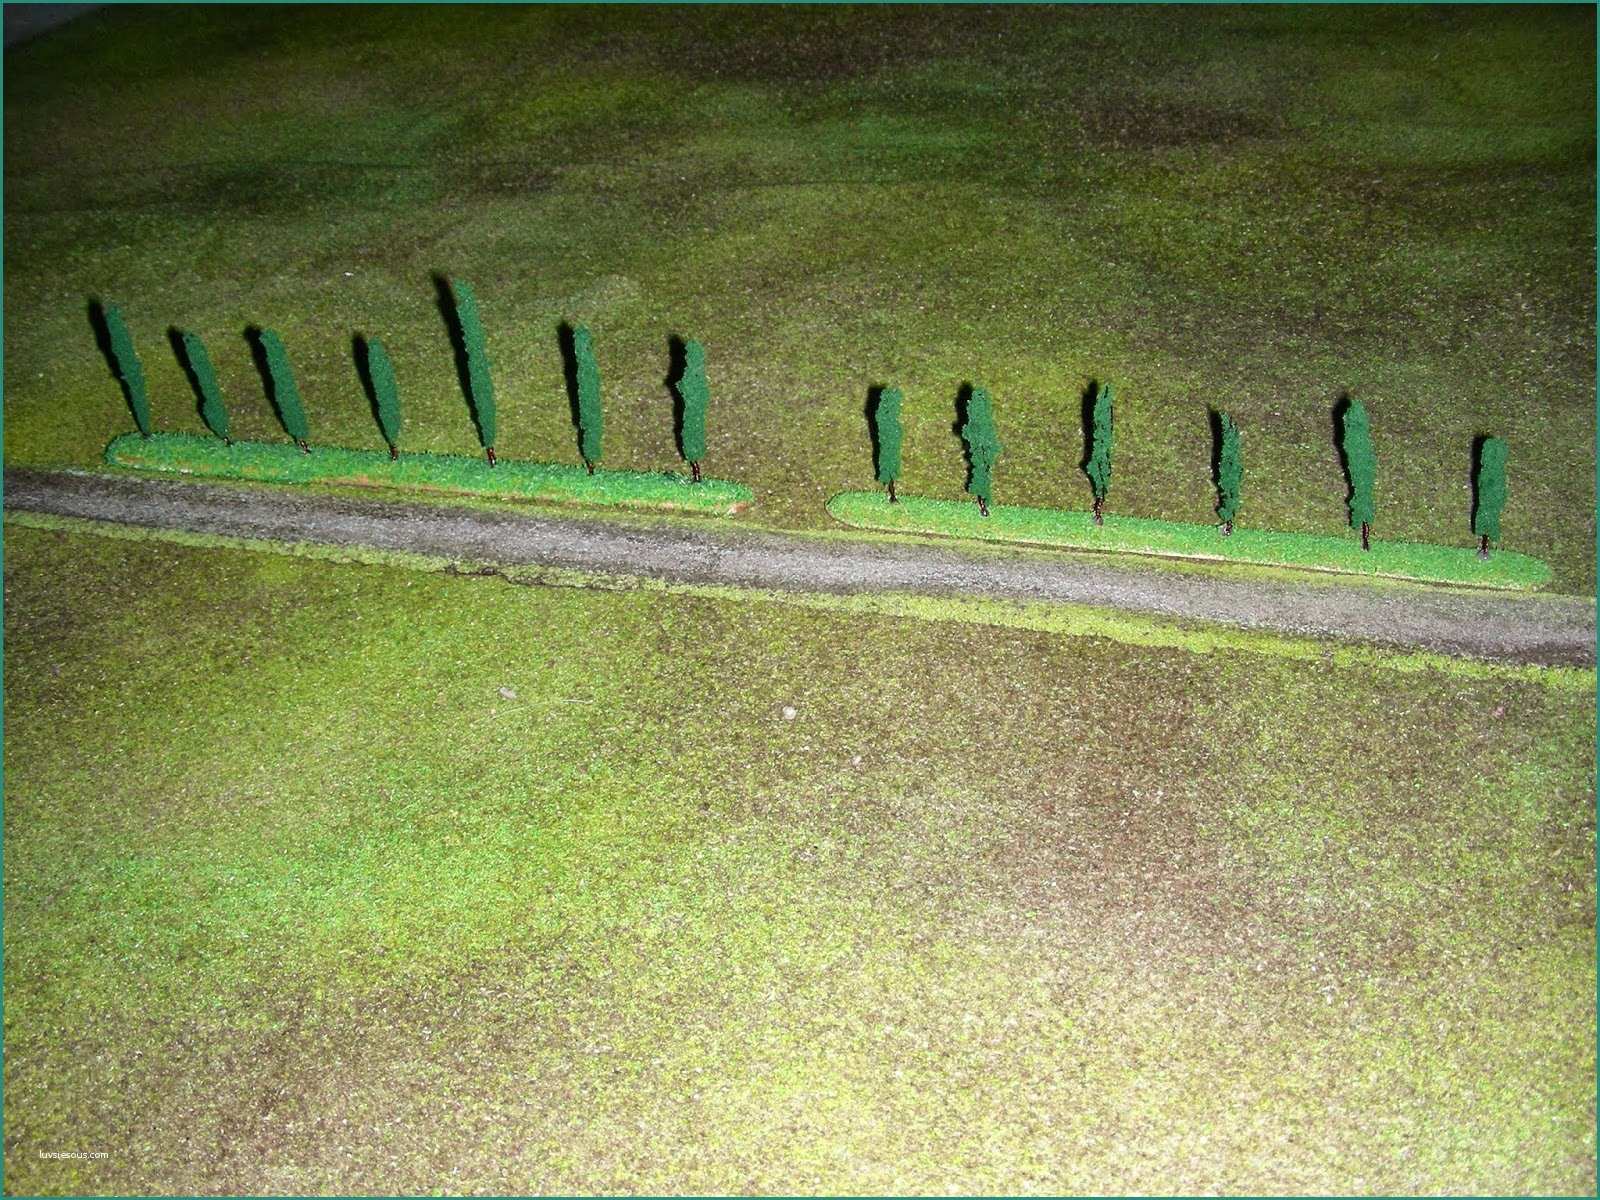 Siepe Artificiale Leroy Merlin E Napoleonic Wargame with 6mm 1 300 or 1 285 Miniatures Settembre 2013